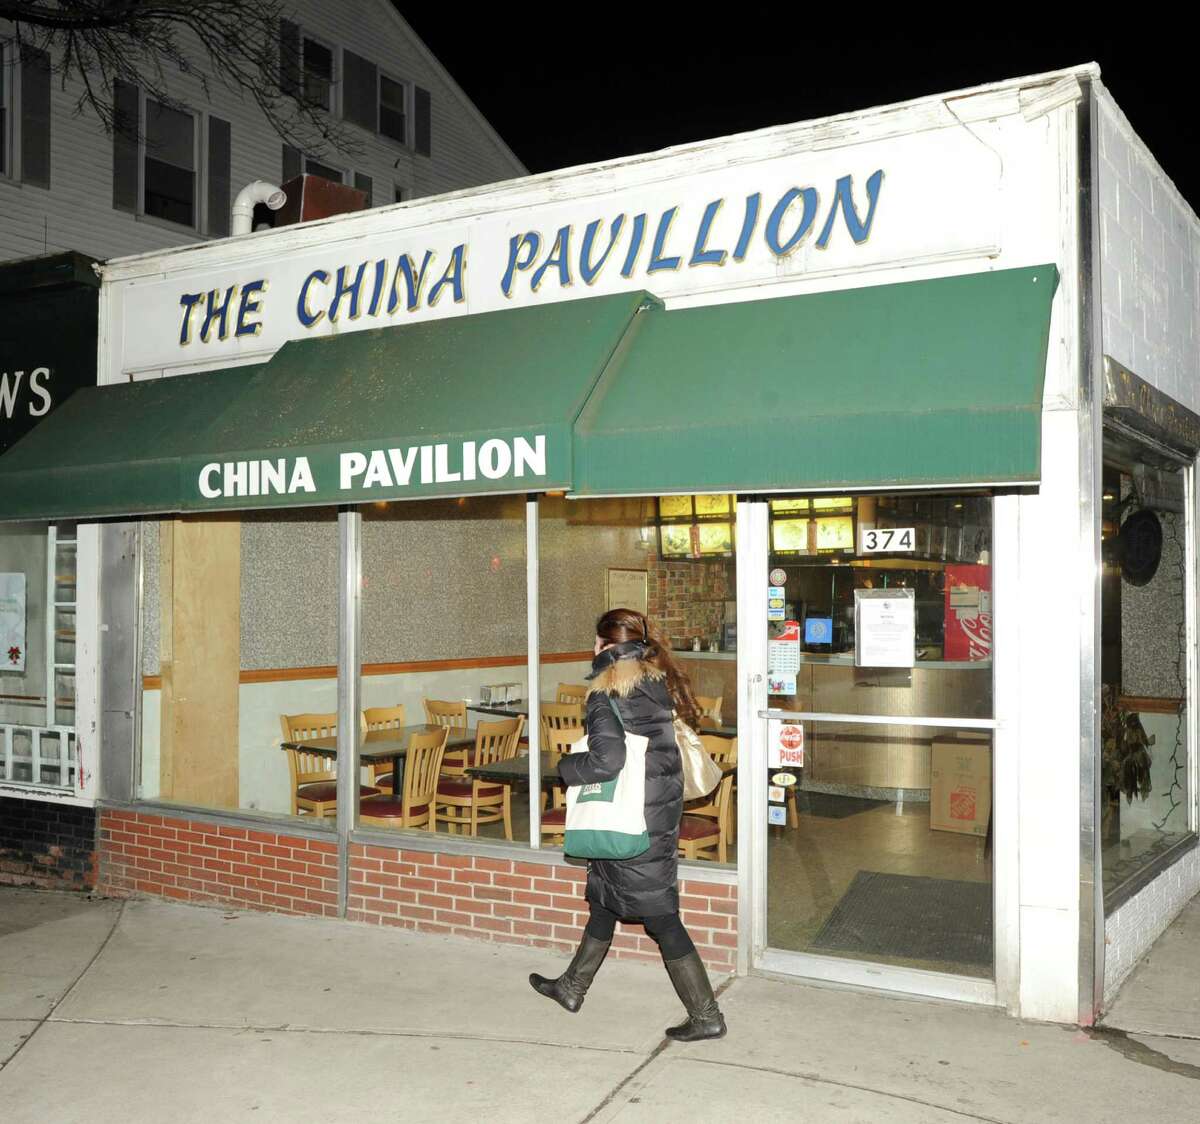 A woman walks past the China Pavilion restaurant at 374 Greenwich Ave., Thursday, Feb. 7. 2013. The restaurant has been closed by the Greenwich Health Department.